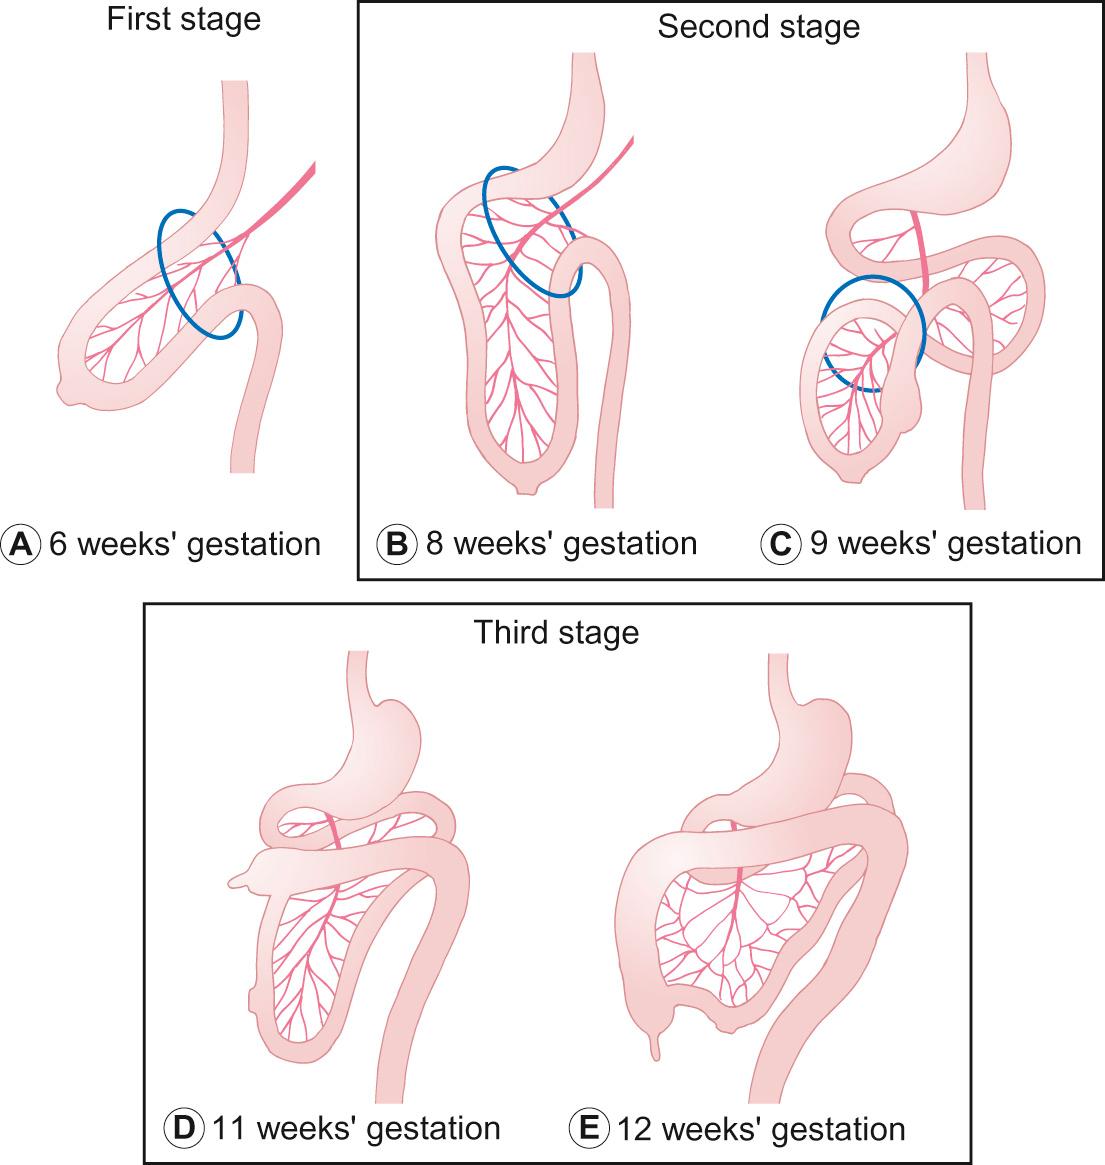 Fig. 14.2, Normal elongation and rotation of the midgut. This process is complex and can easily go wrong (see below). Failure of correct rotation leads to malrotation and failure of contents to return to the abdominal cavity results in exomphalos.